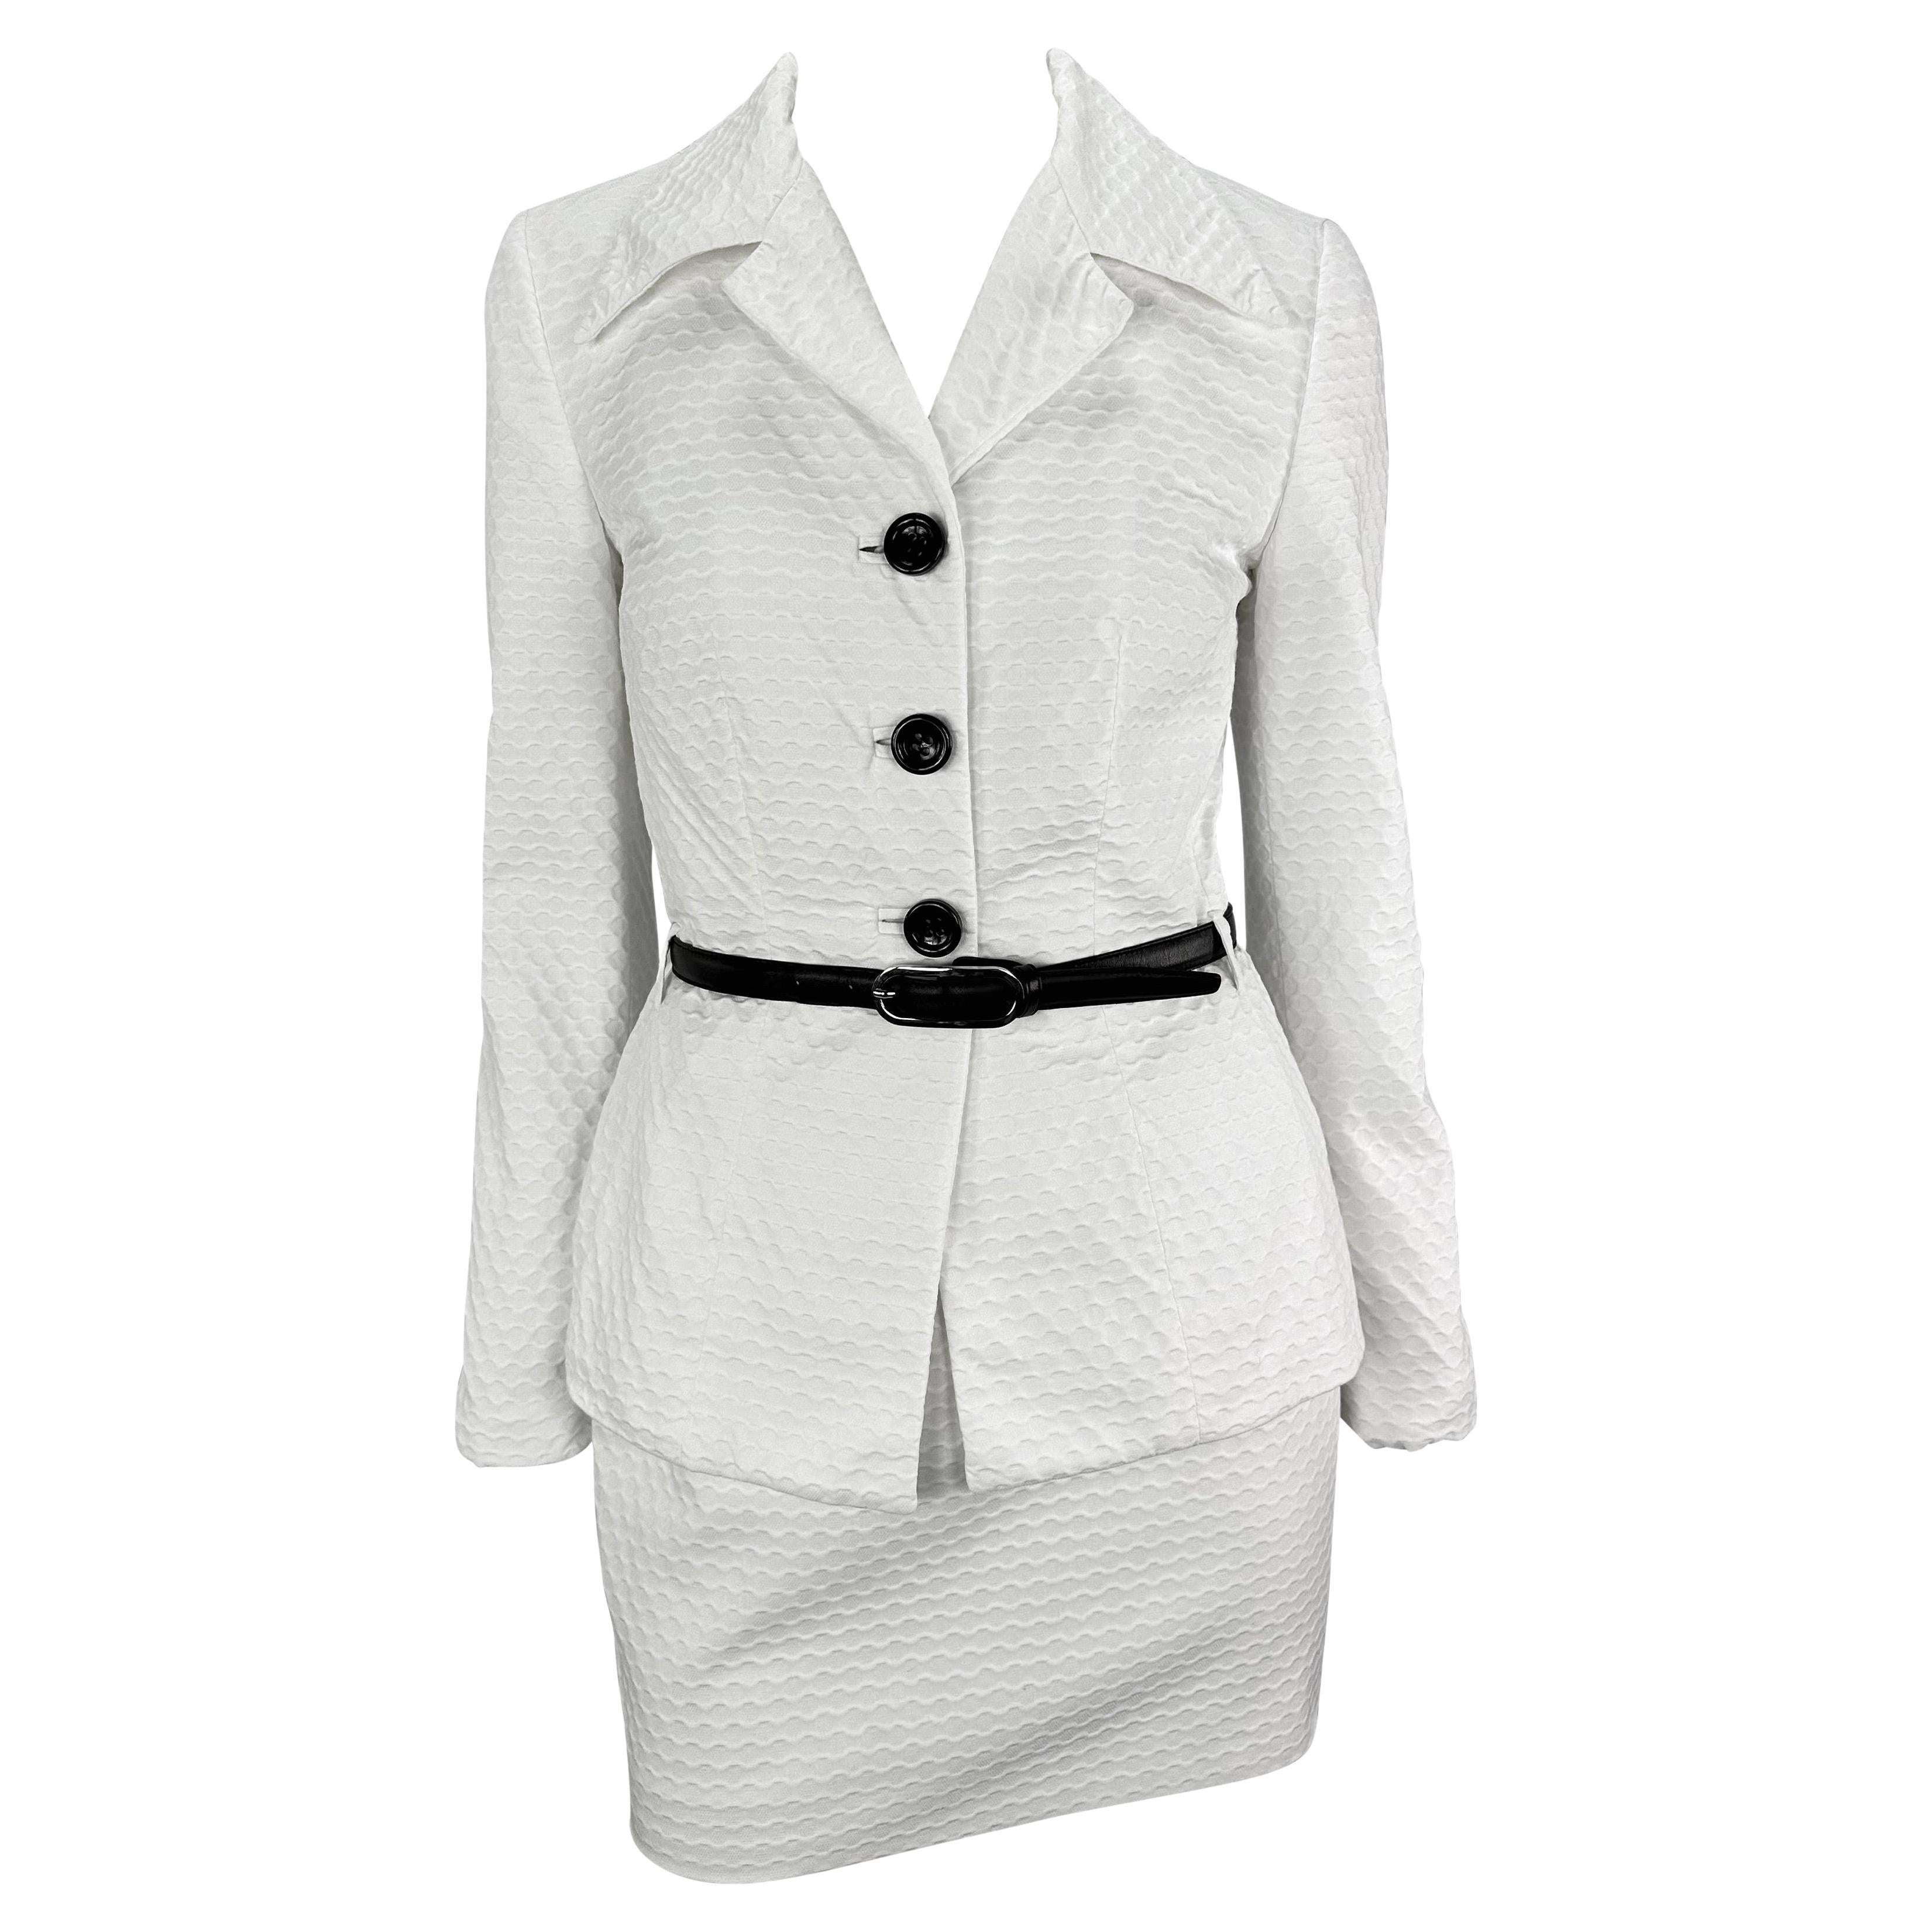 S/S 1995 Dolce & Gabbana Belted White Waffle Knit Mini Skirt Suit For Sale